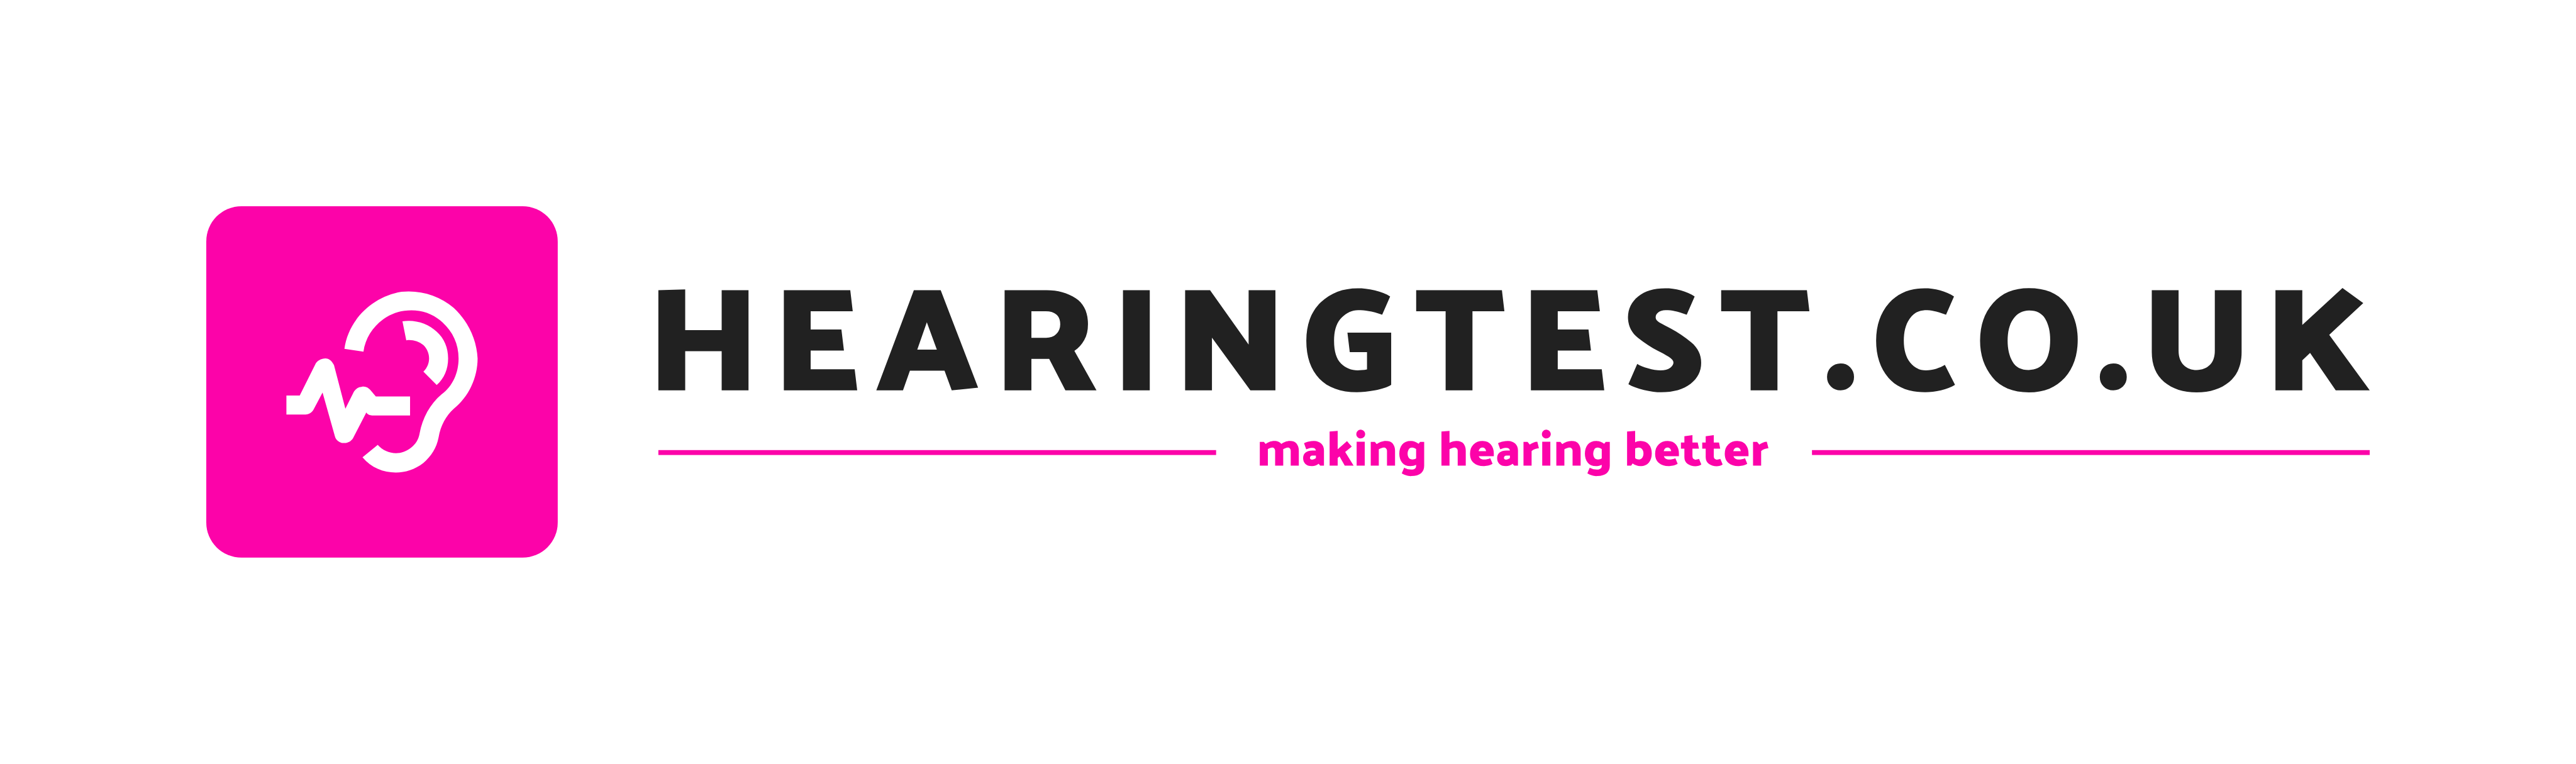 Free Hearing Test for Adults in Kinghorn | Hearingtest.co.uk